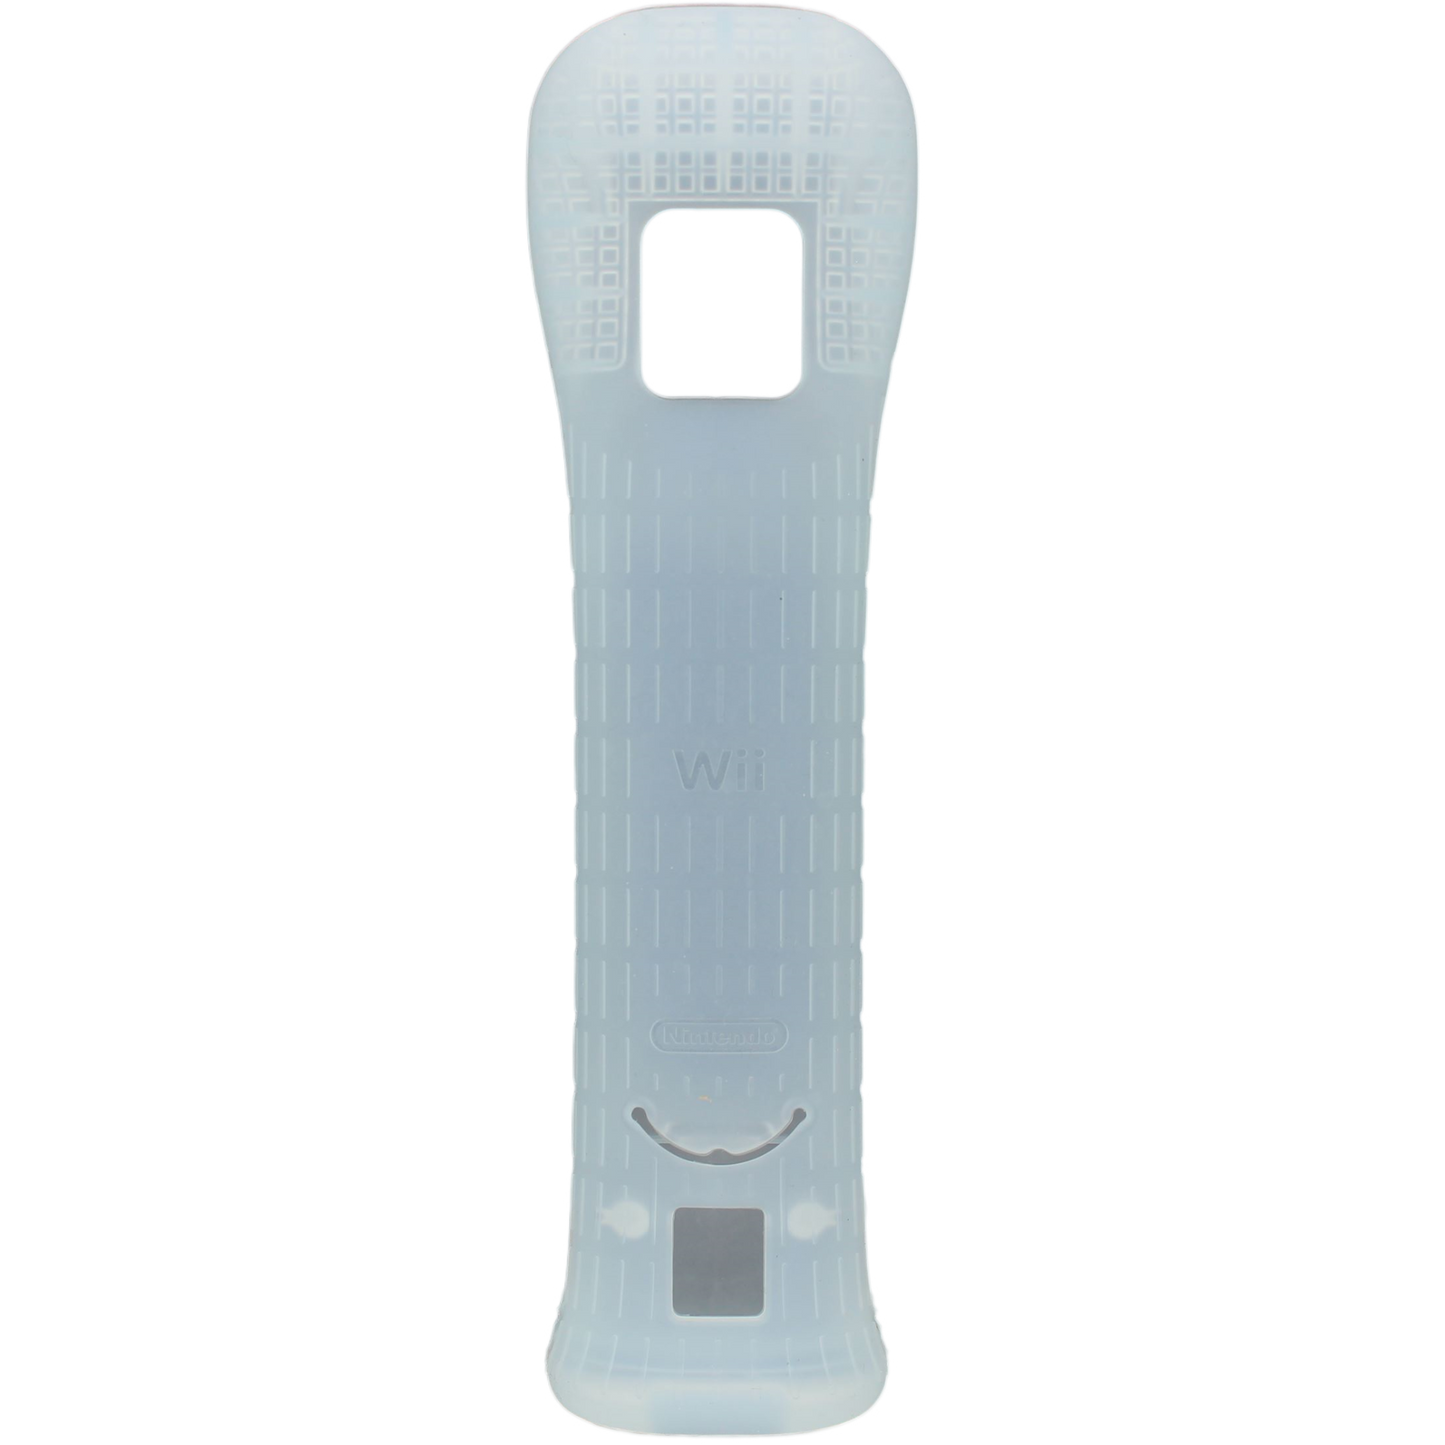 Silicone Wii Remote with Motion Plus Cover